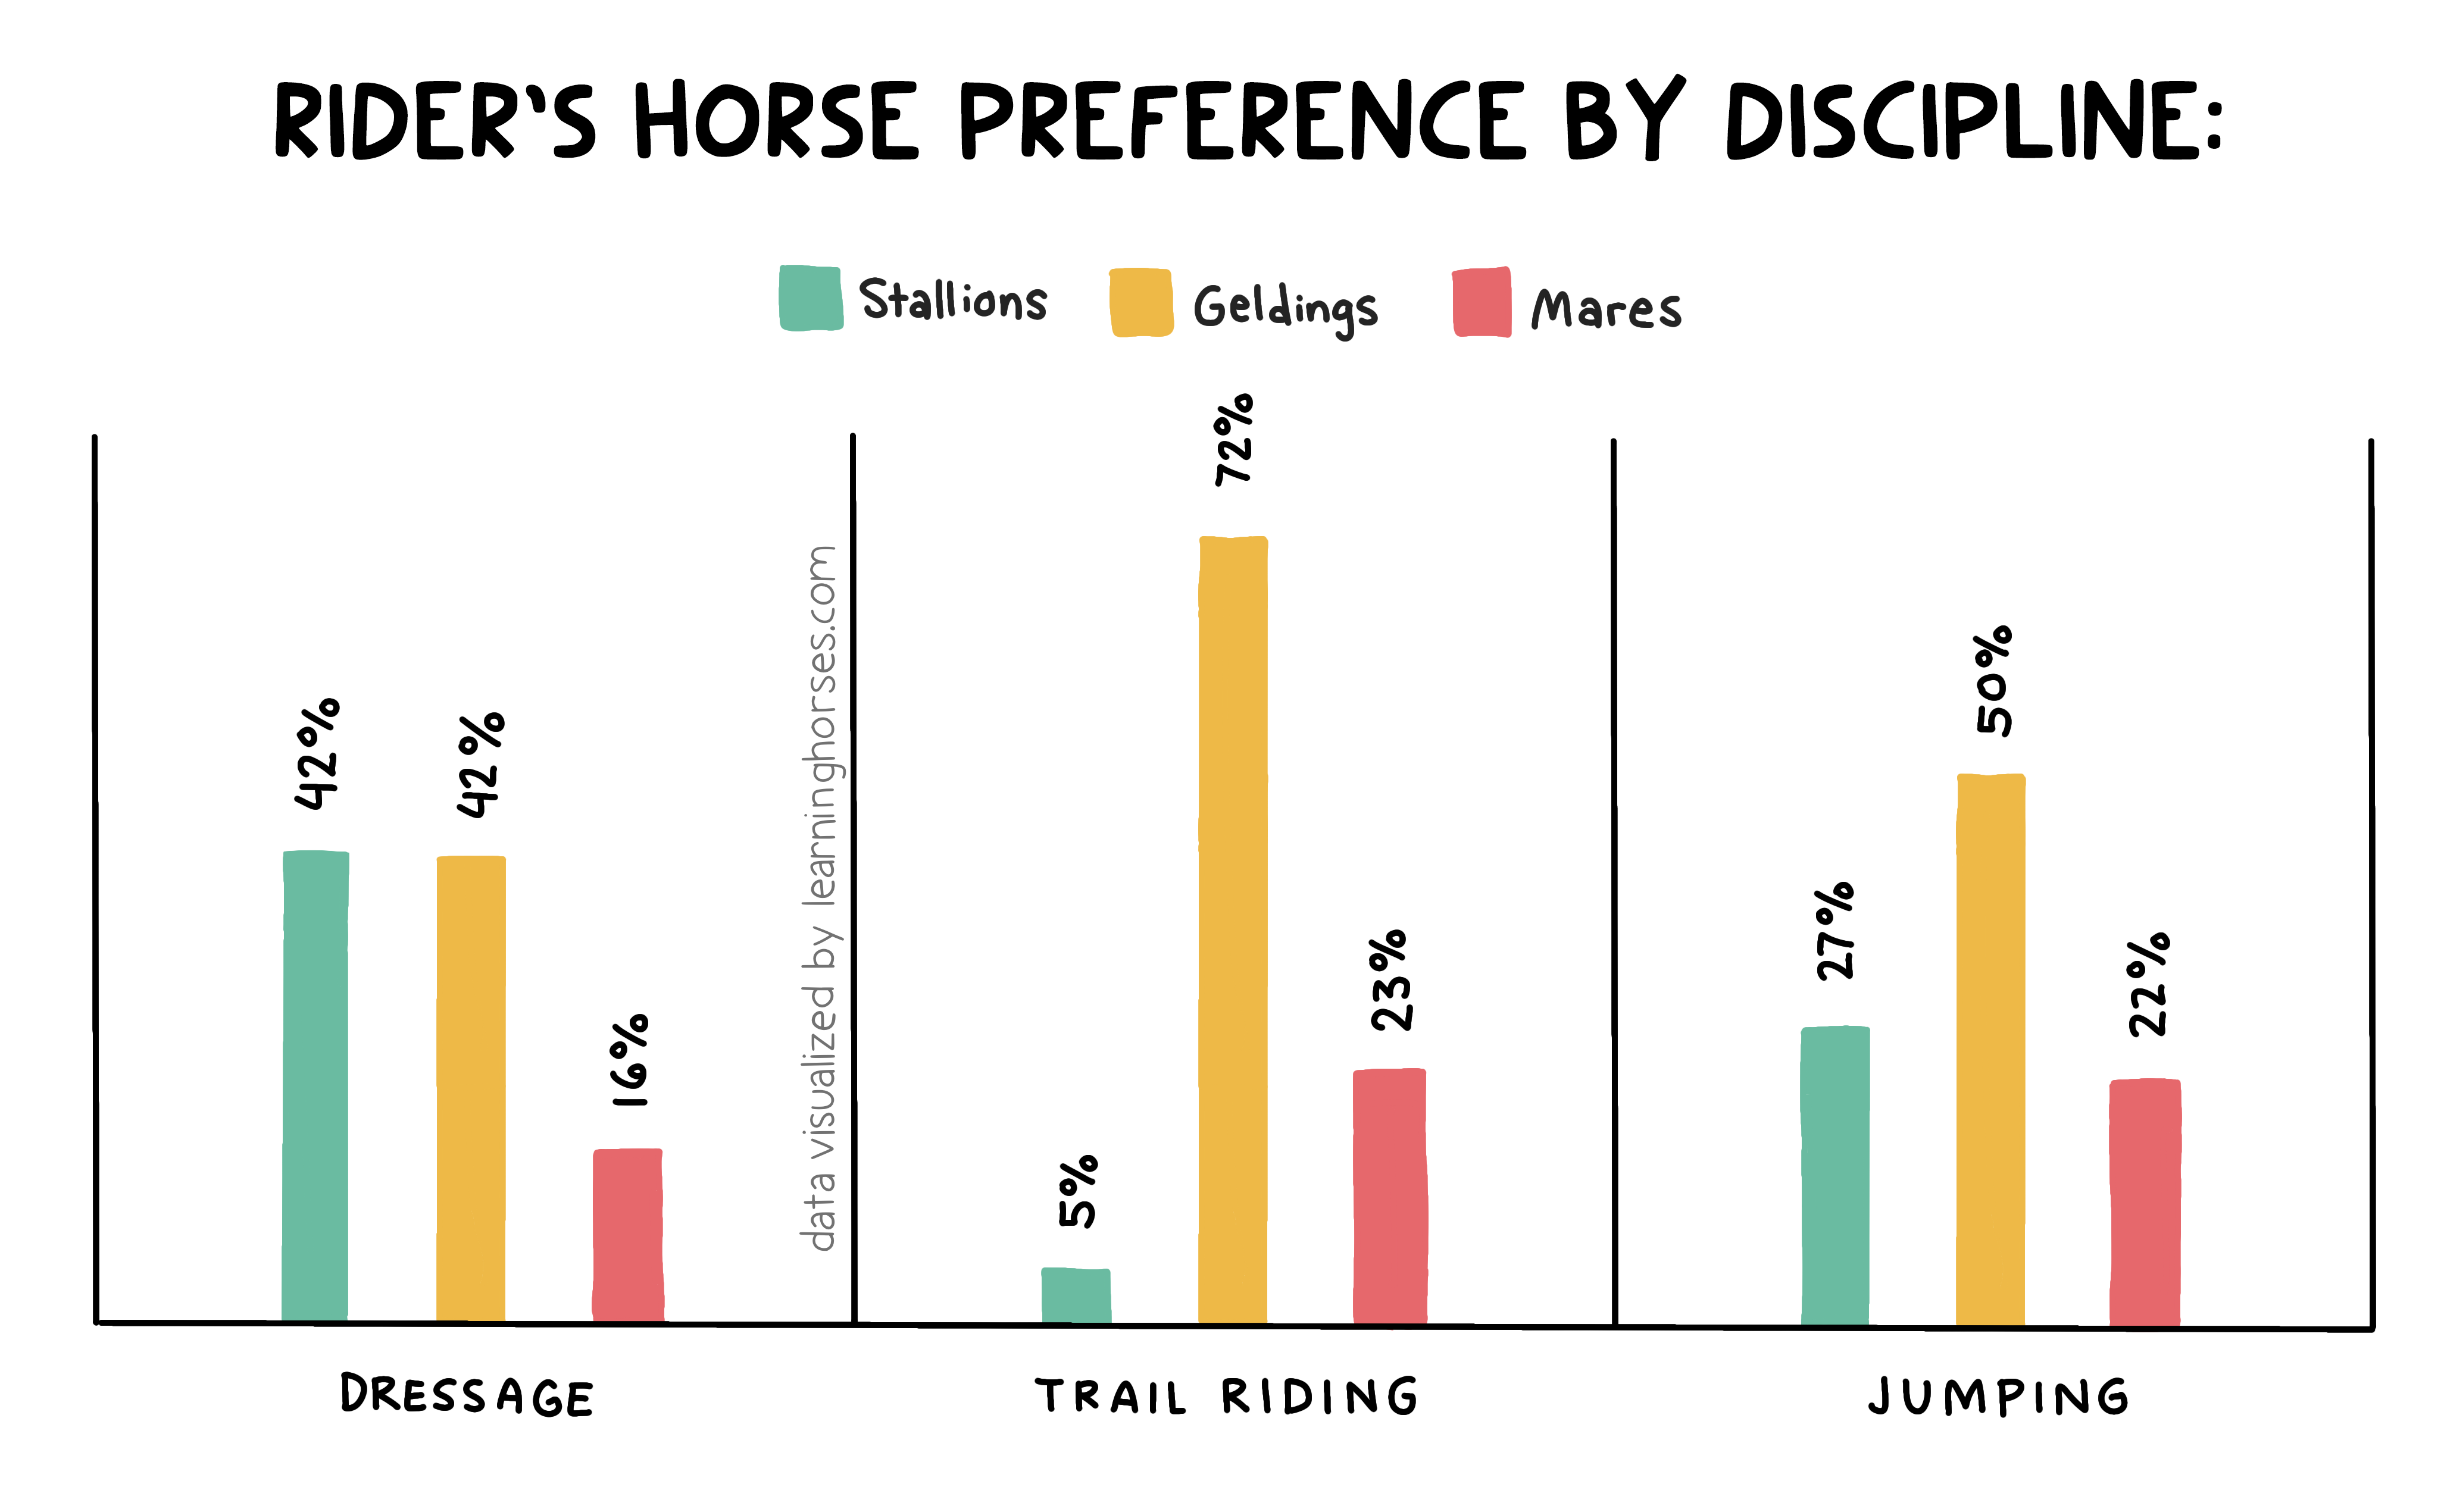 An infographic bar chart showing how rider preference for geldings is consistent through riding styles.